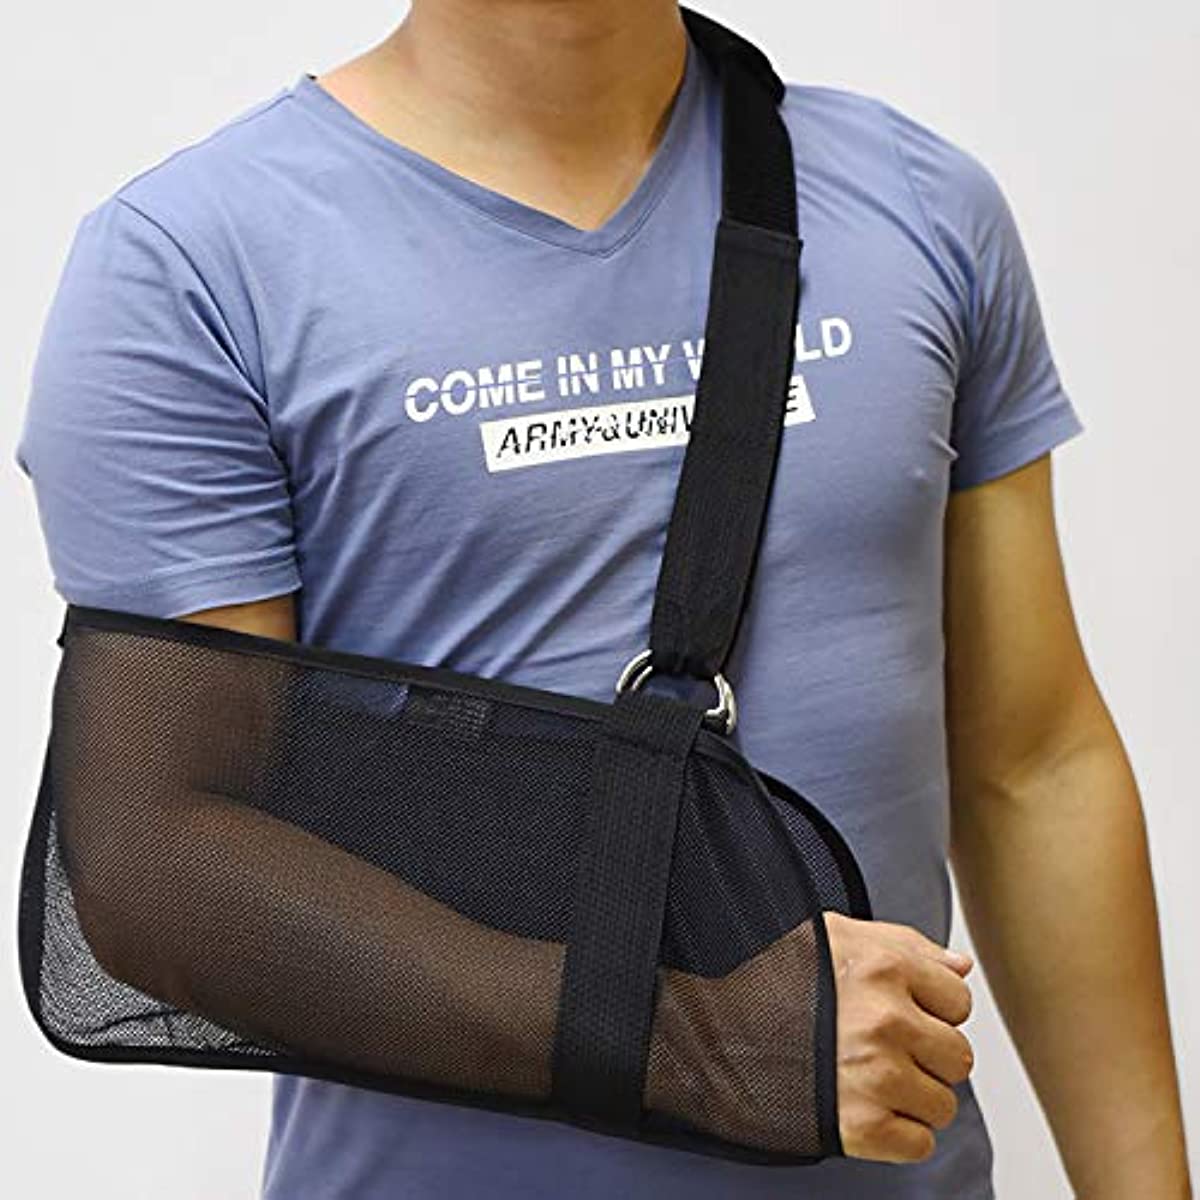 Breathable Mesh Arm Sling, Arm Sling Shoulder Immobilizer Rotator Cuff Wrist Elbow Forearm Support Brace, Arm Sling Elbow Support, for Broken&Fractured Arm, Left and Right Arm (Black)…